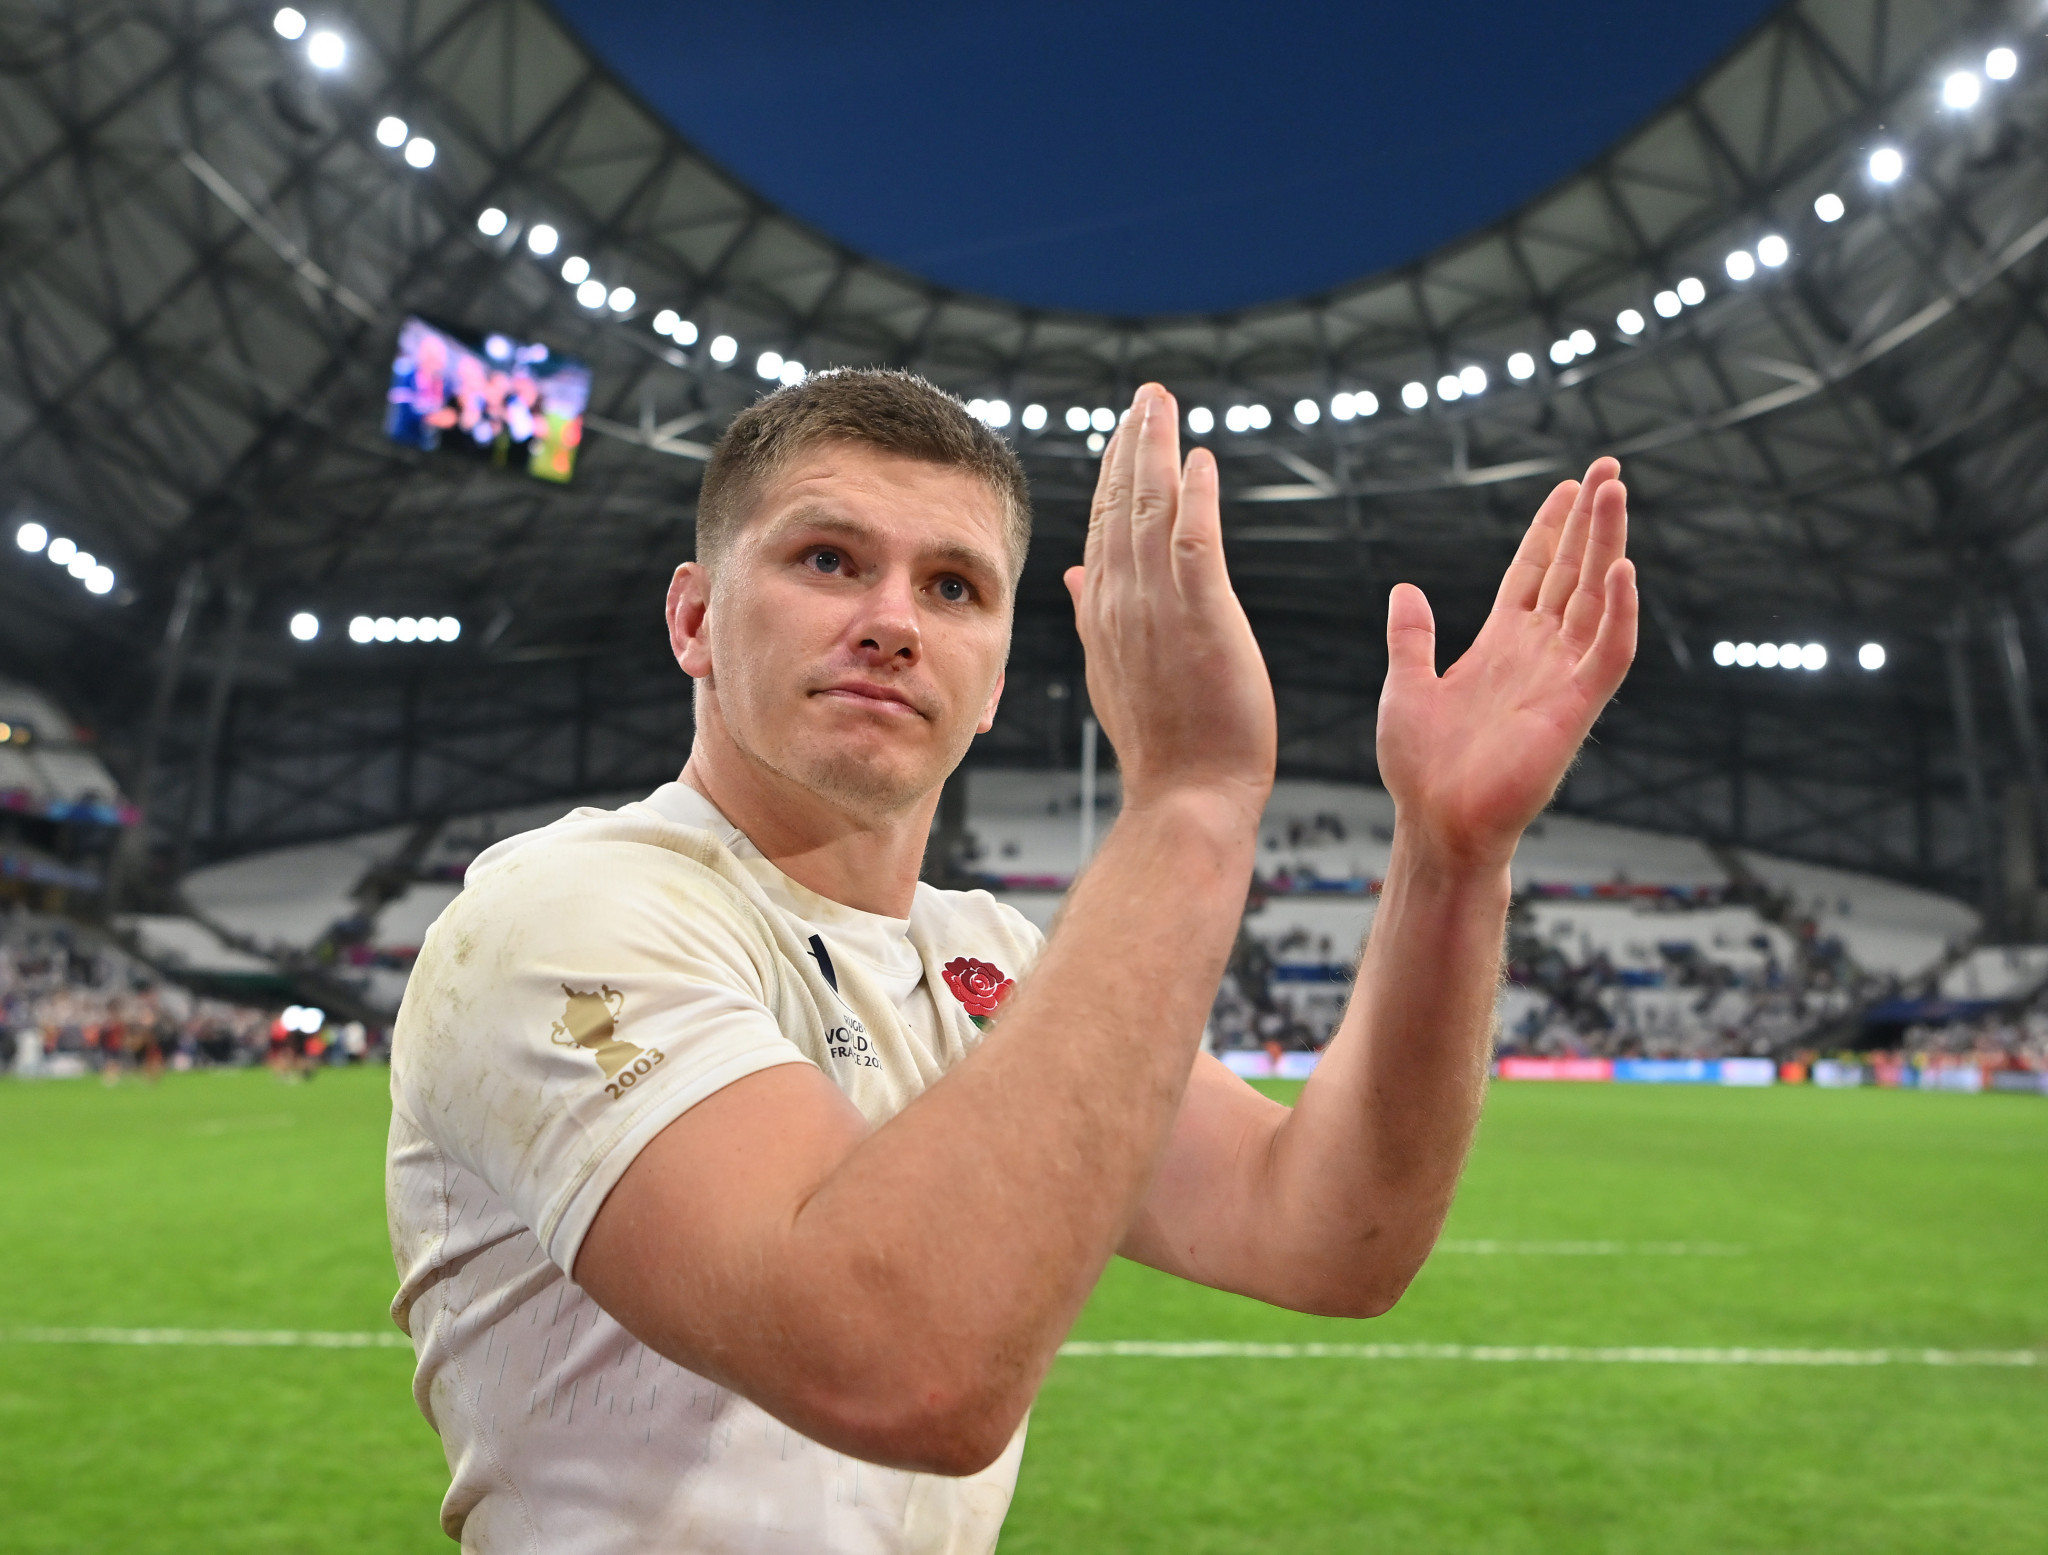 Owen Farrell's name was booed by fans who disagreed with his selection before the match but he proved his worth by kicking two-thirds of England's points ©Getty Images